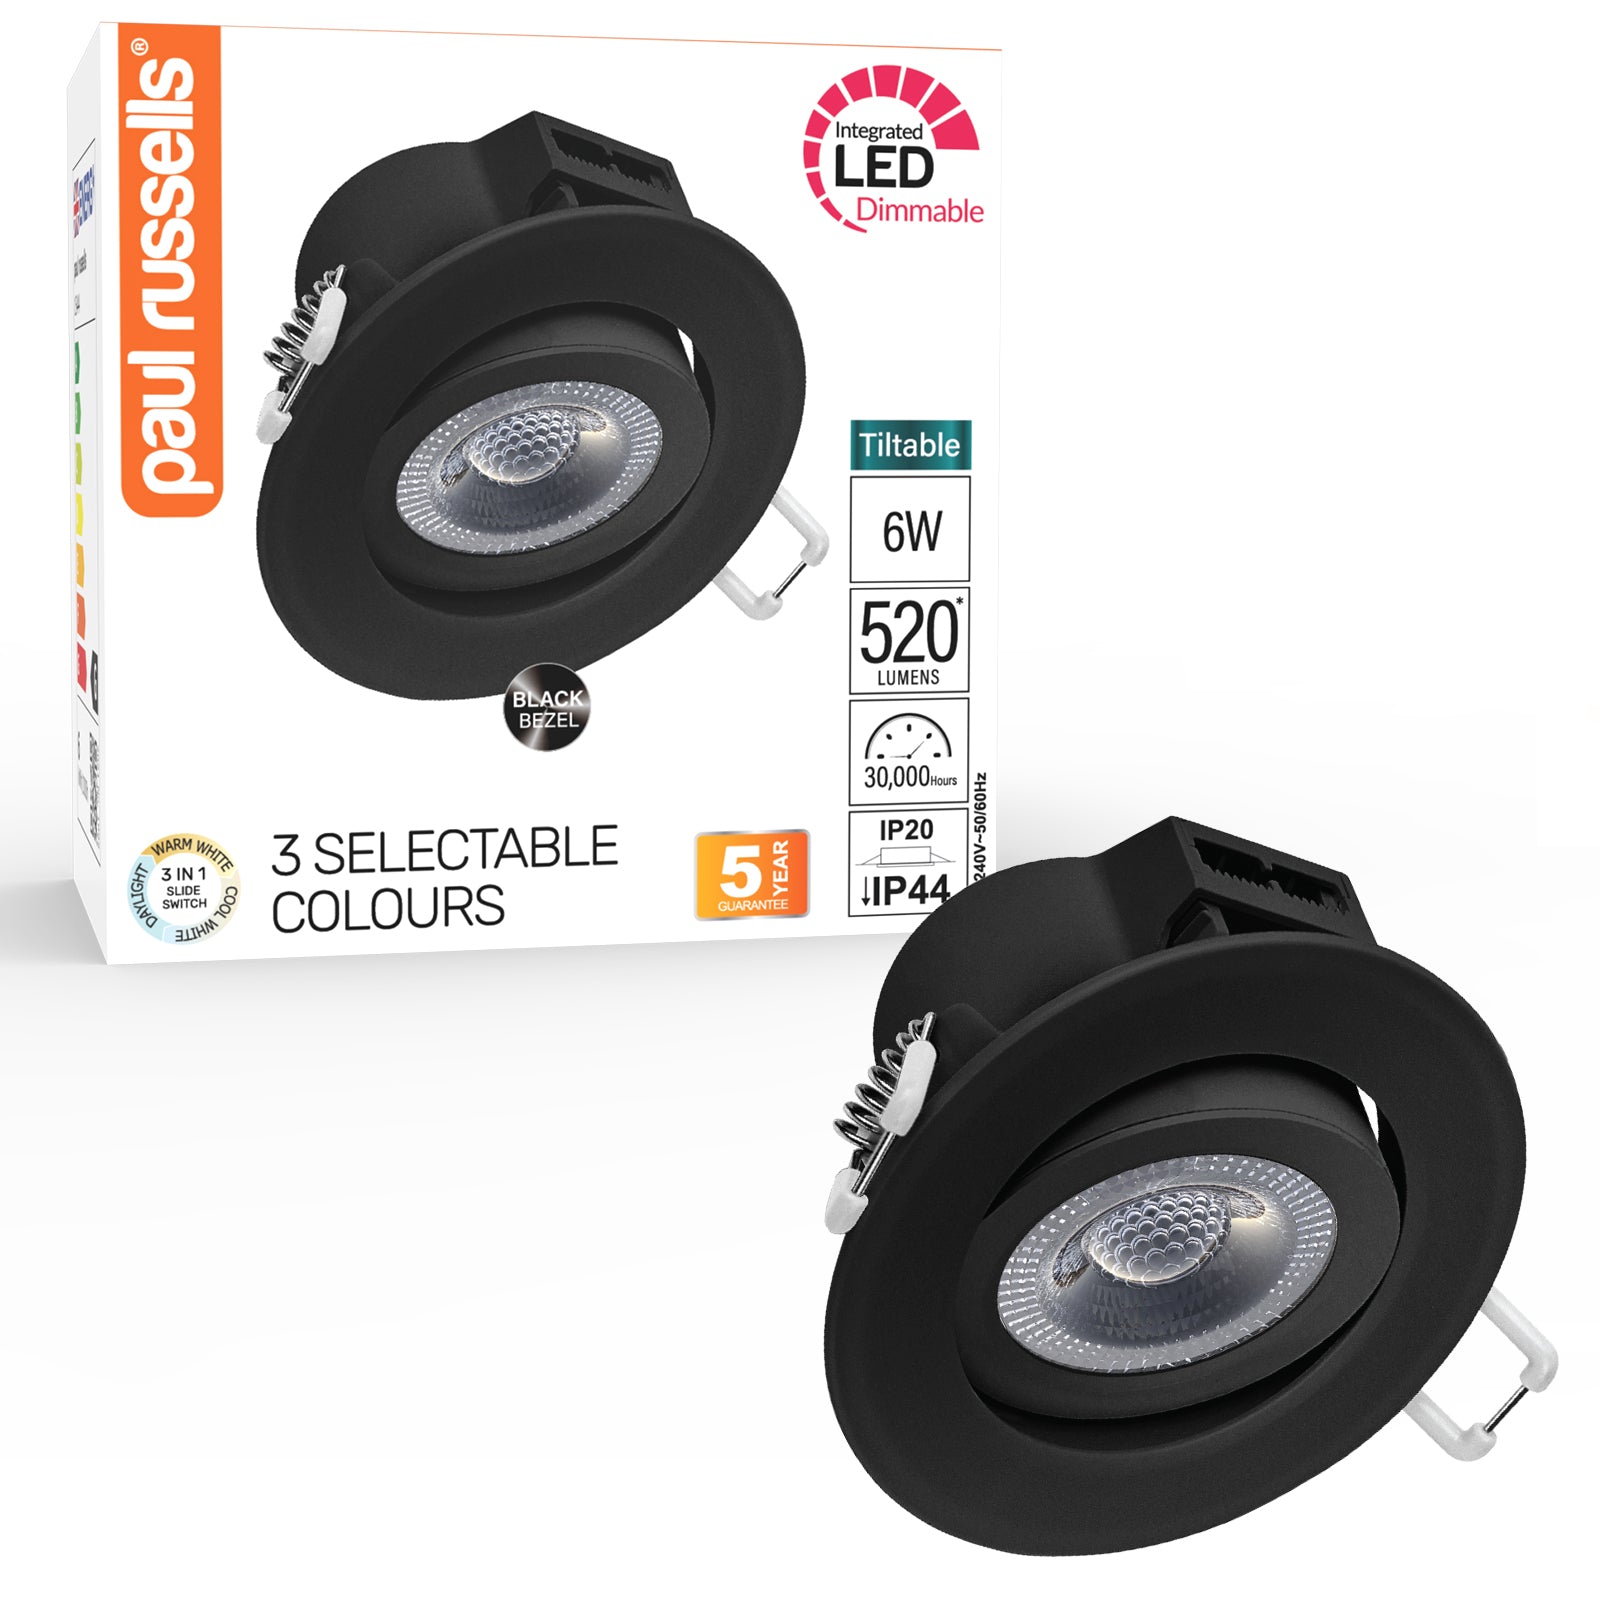 Paul Russells 6W LED Non Fire Rated Tiltable Downlight, Warm/Cool/Day White 3 Adjustable CCT, IP44, Black Bezel